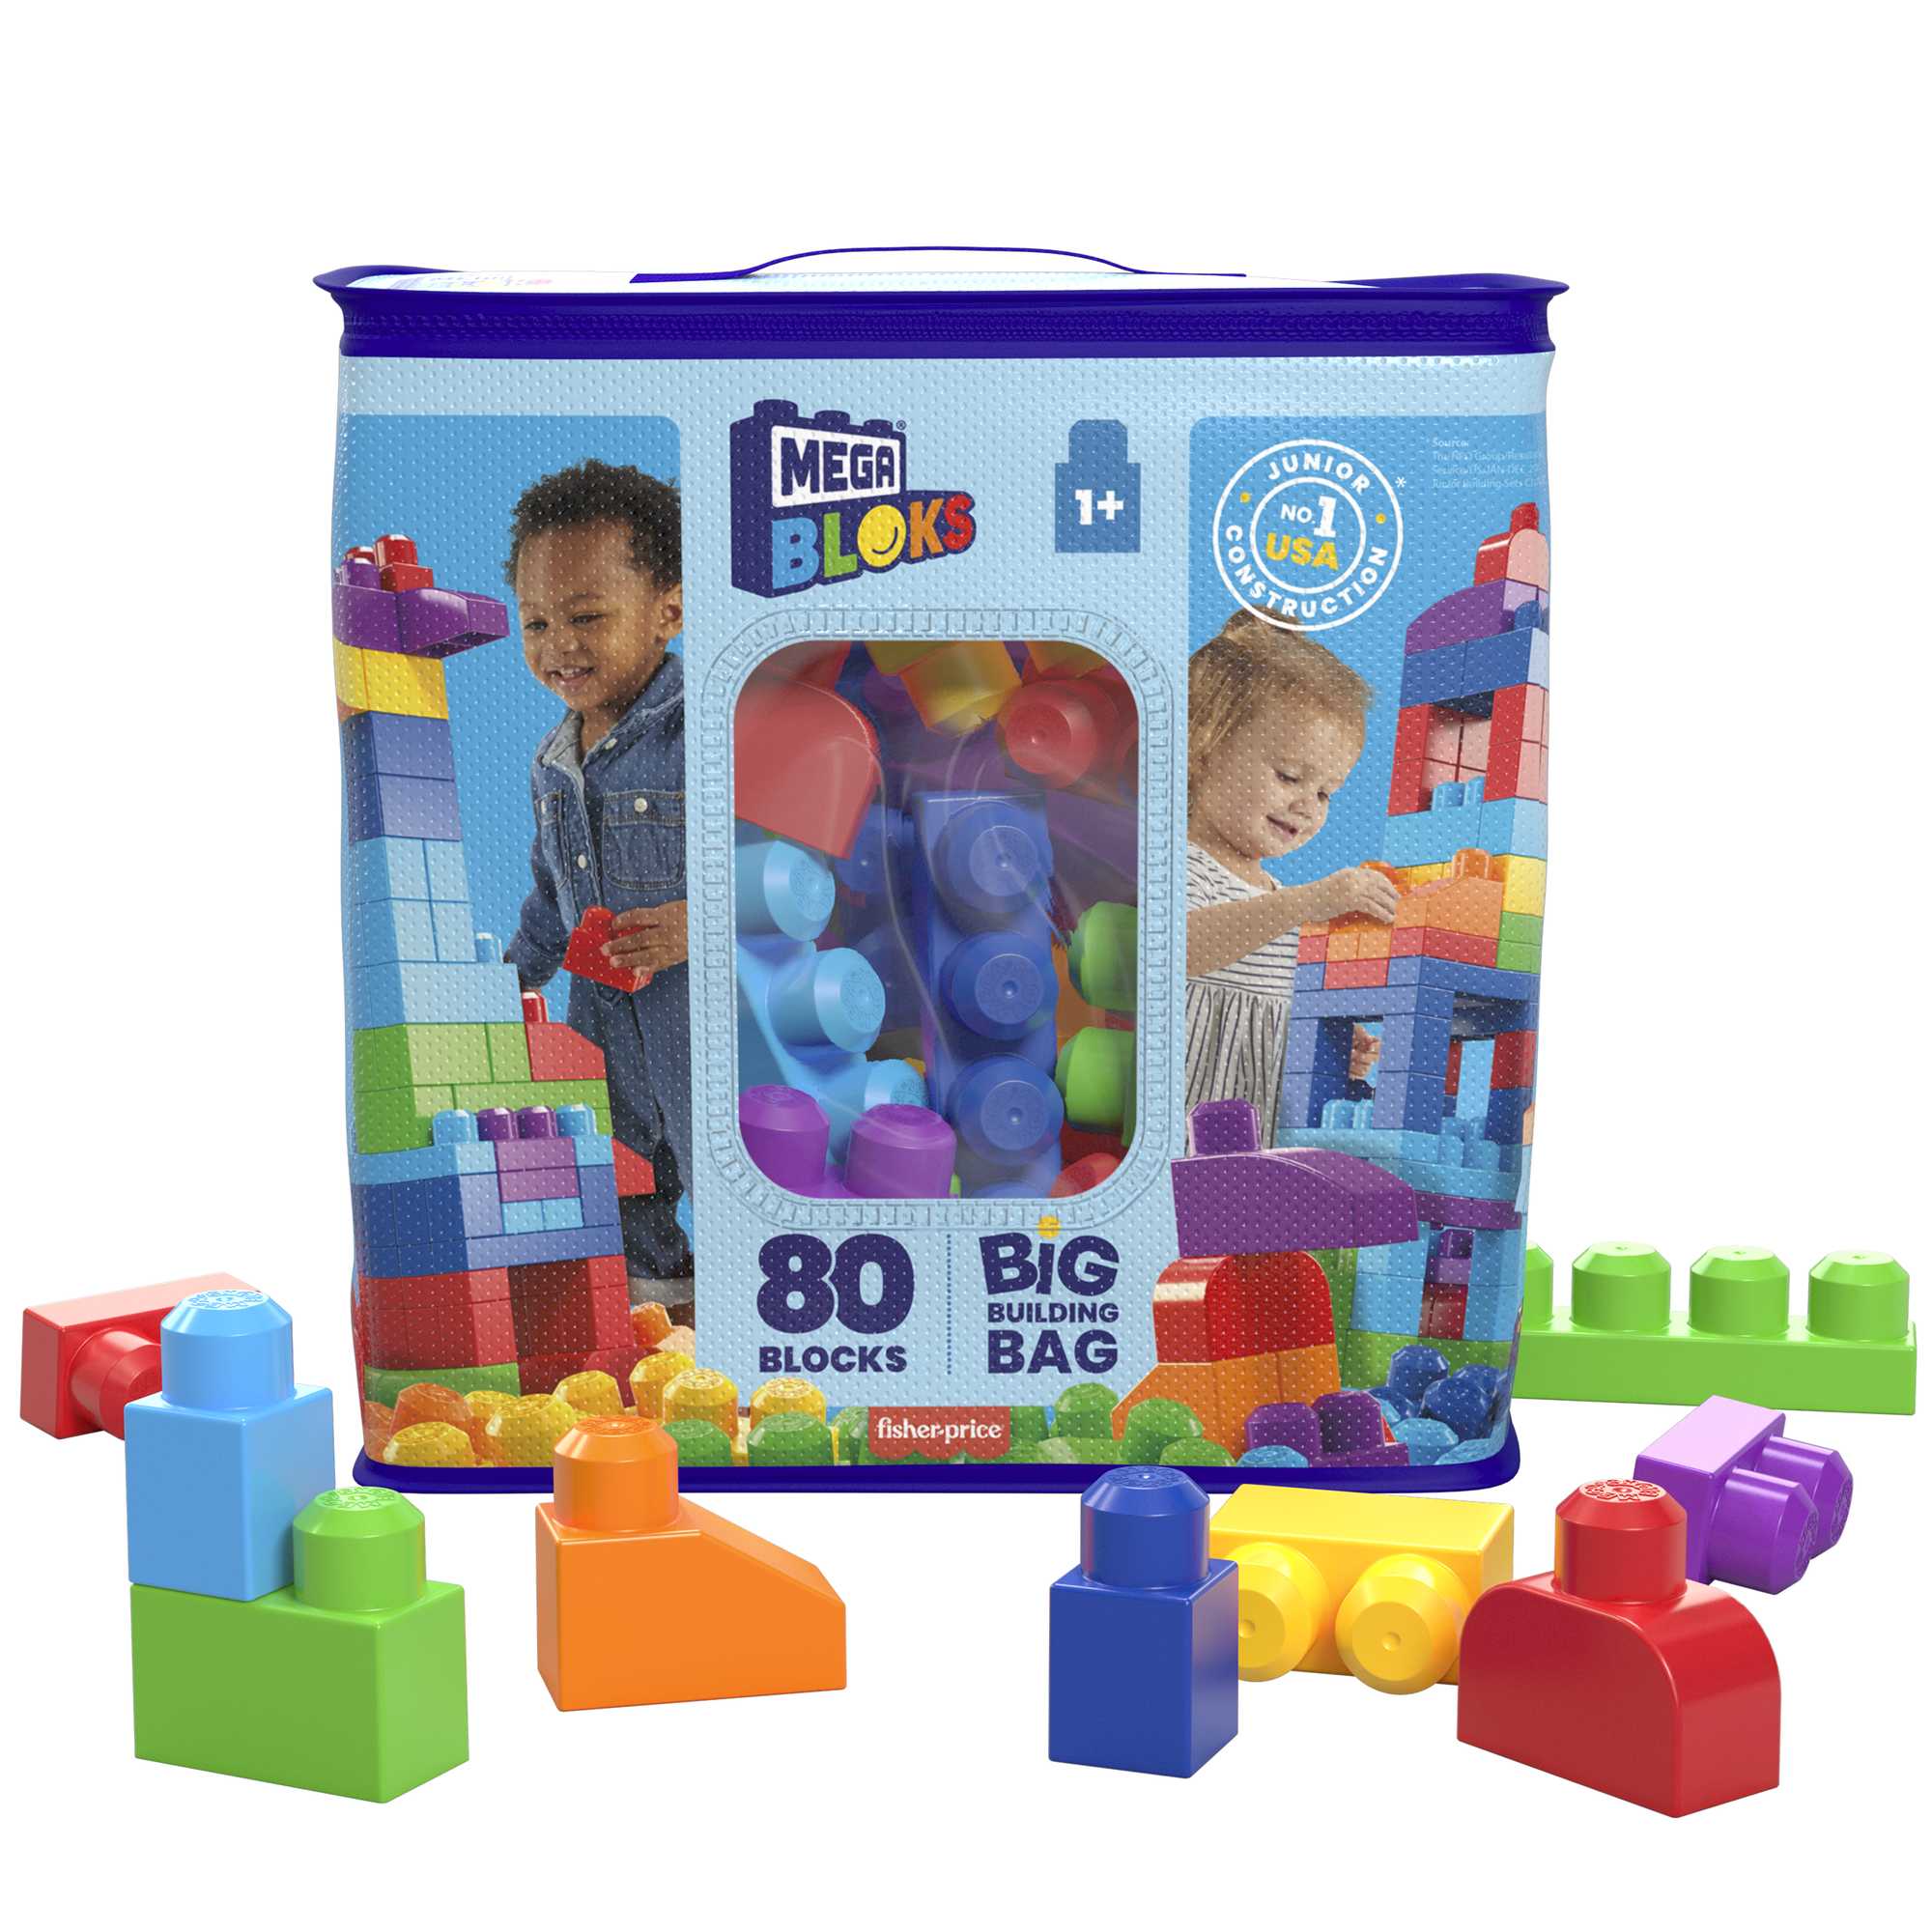 MEGA BLOKS Fisher-Price Big Building Bag, Building Blocks for Toddlers With Storage (80 Pieces), Blue, Ages 1-5 Years - image 1 of 7